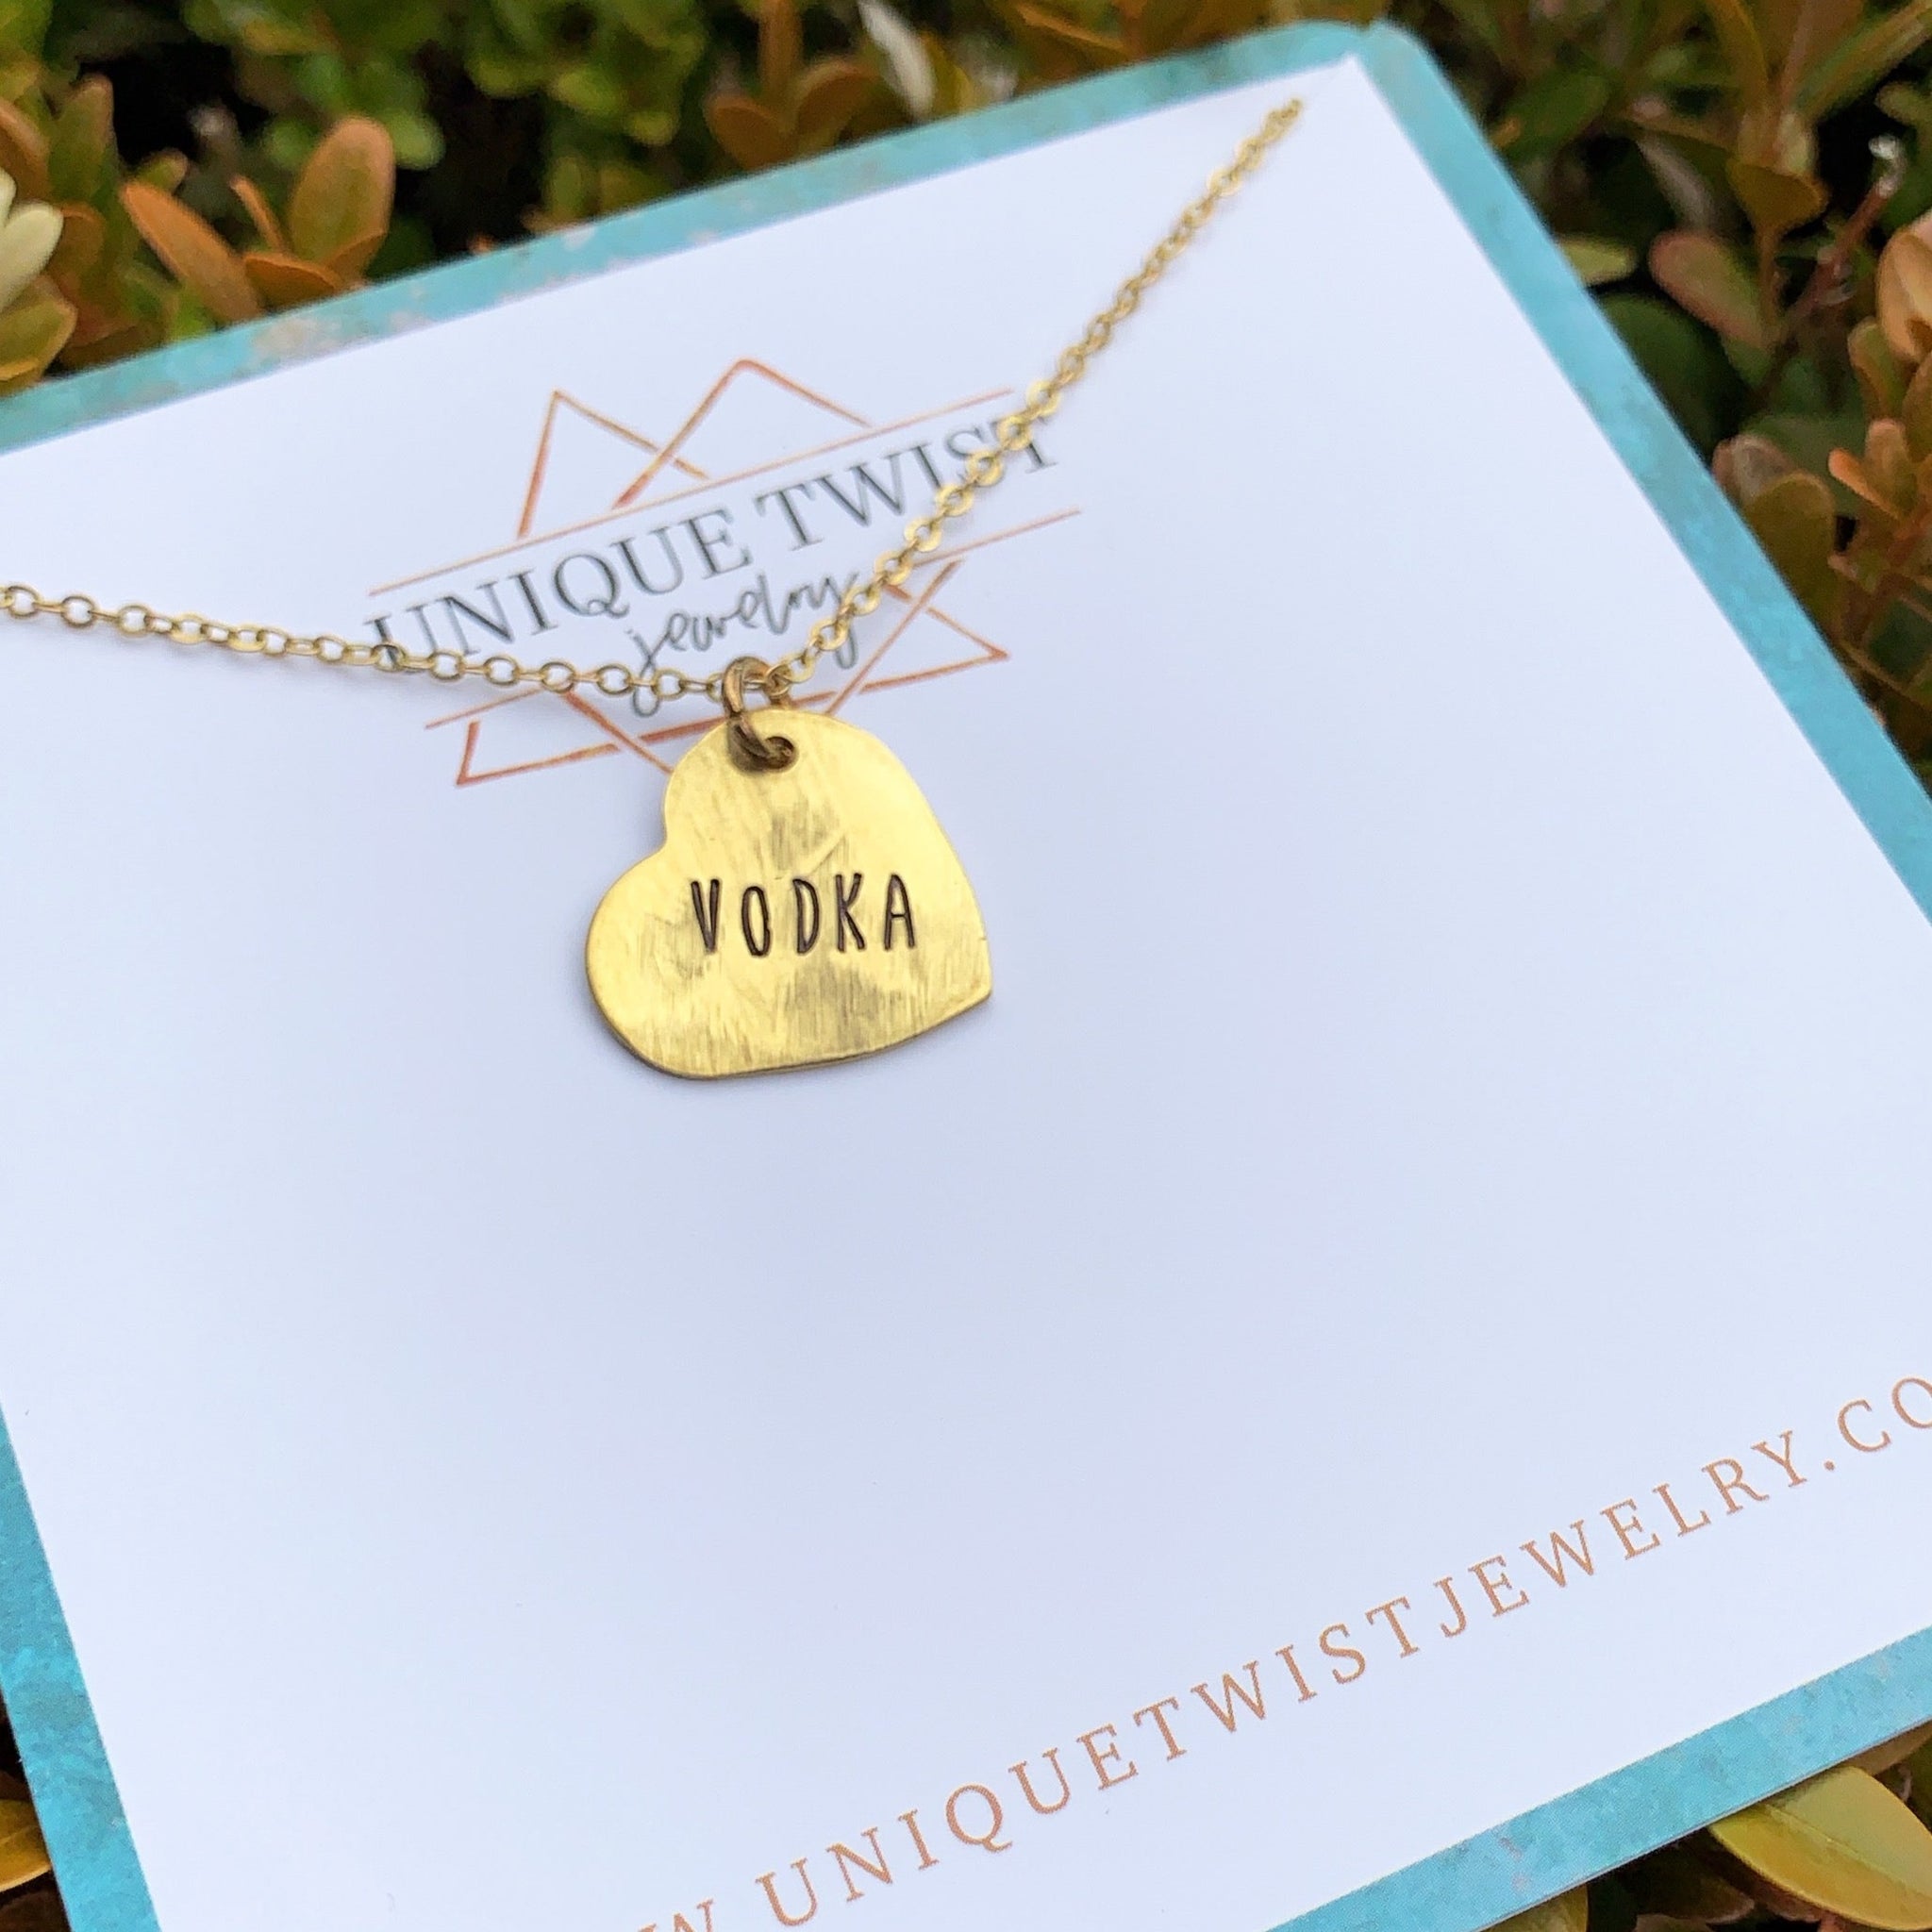 Vodka Love Hand-Stamped Heart Necklace. Handmade jewelry by Unique Twist Jewelry.